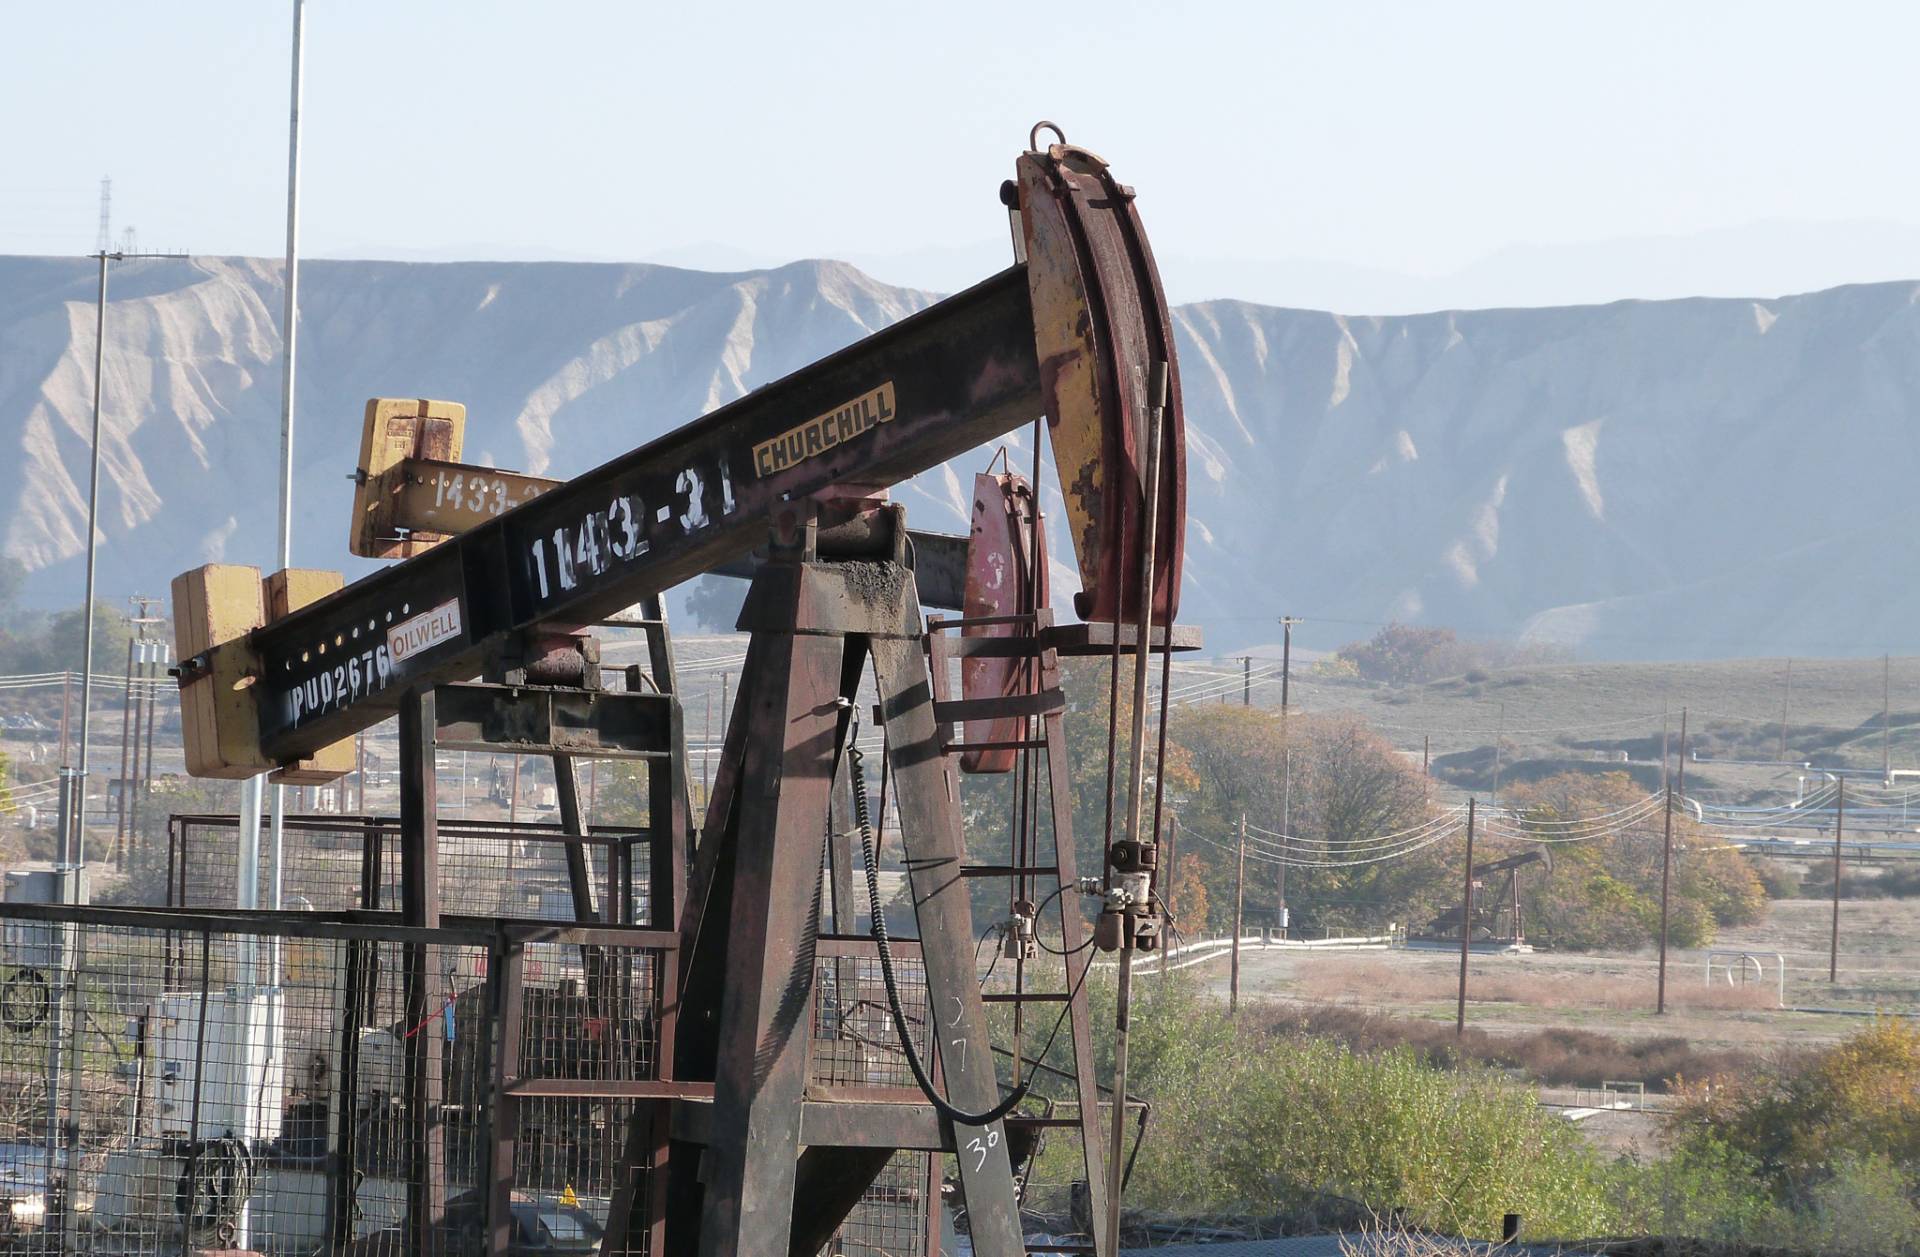 A large, rusty metal pump jack, with the Bluffs in the background, in Chevron's Kern River Oil Field, near Bakersfield, California.